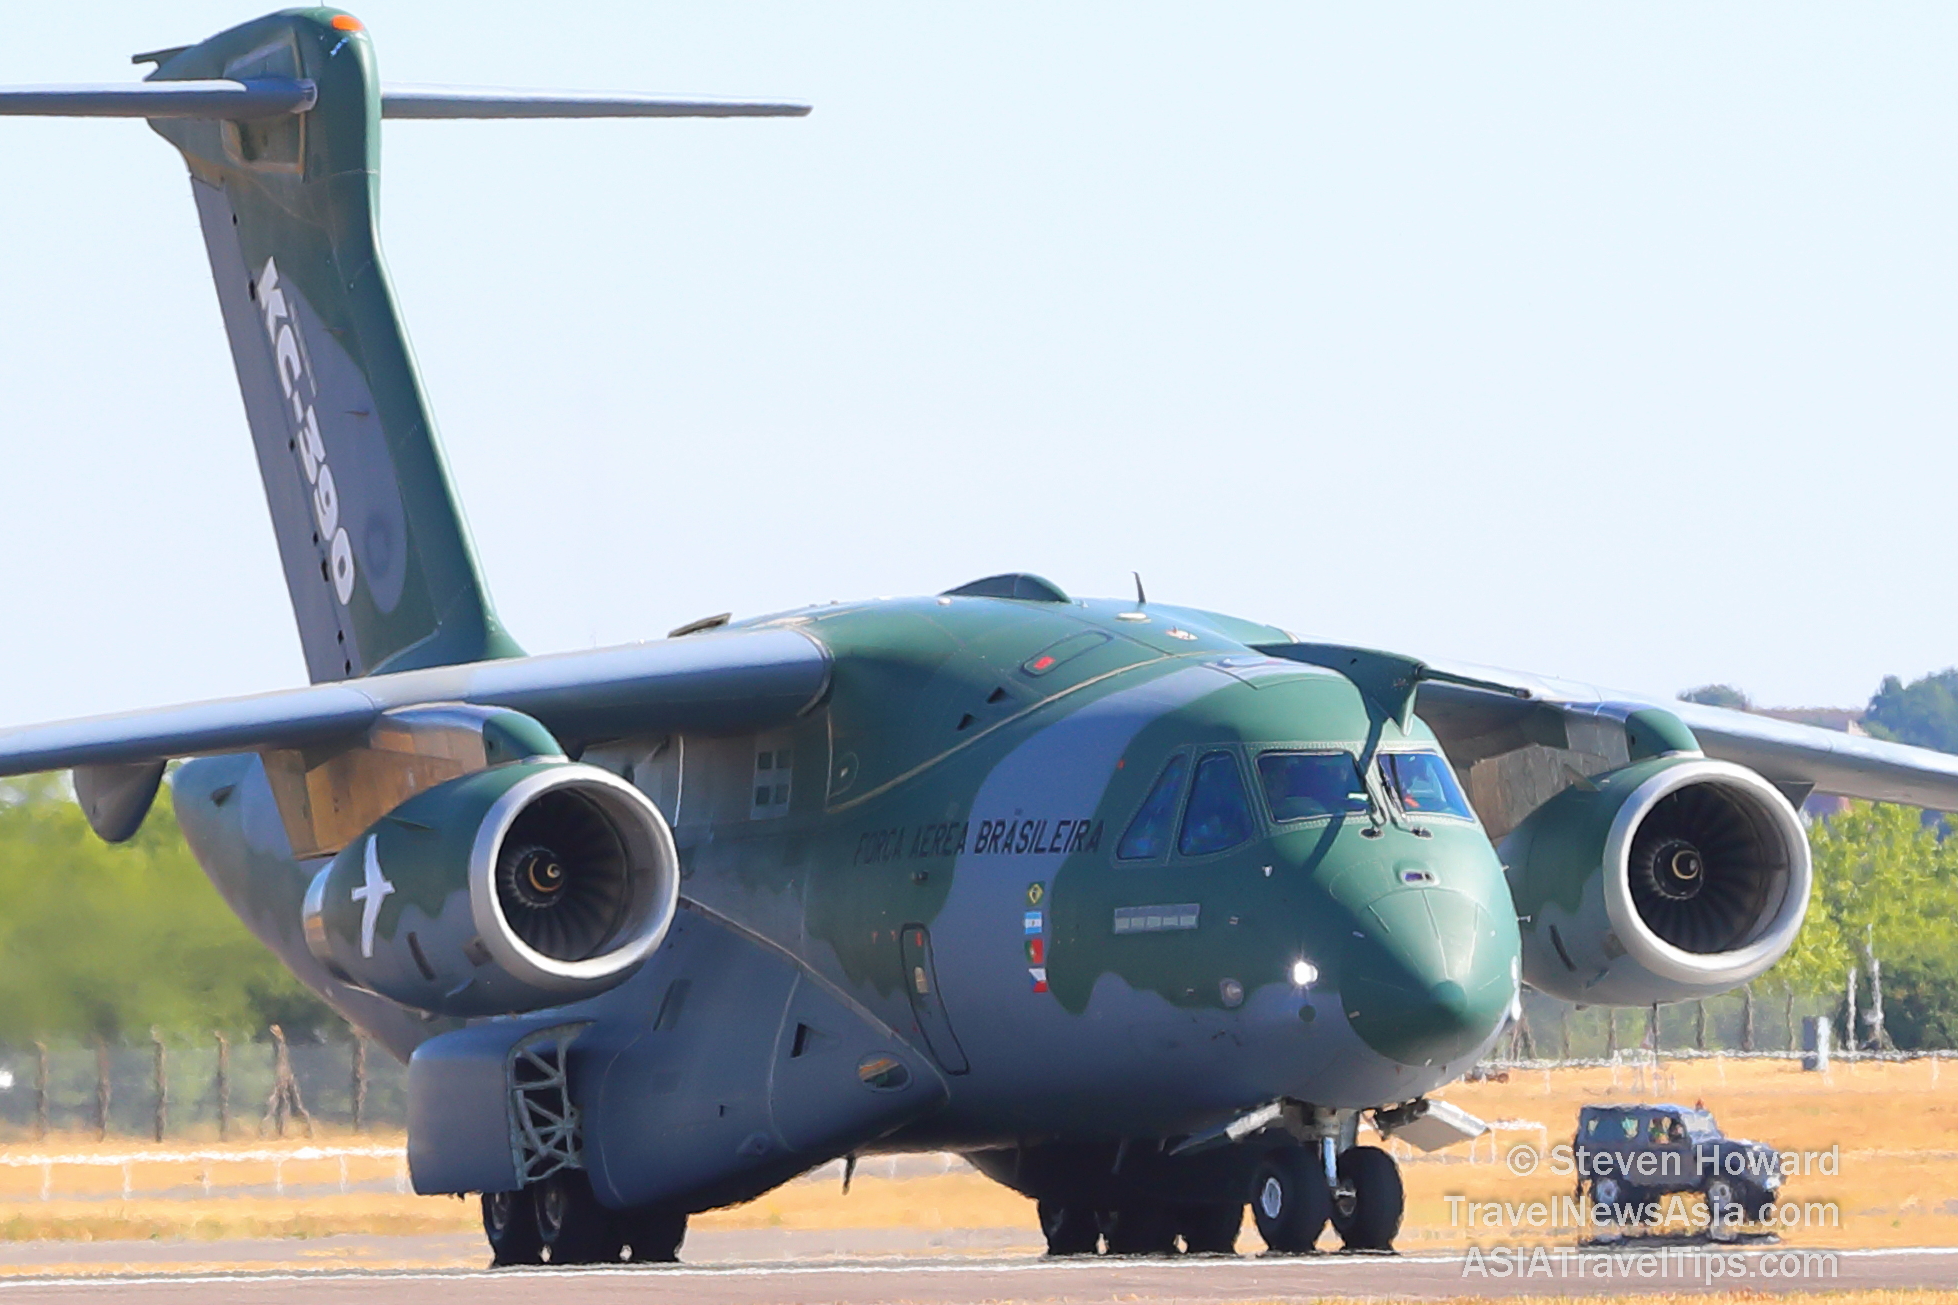 Brazilian Air Force KC-390. Picture by Steven Howard of TravelNewsAsia.com Click to enlarge.